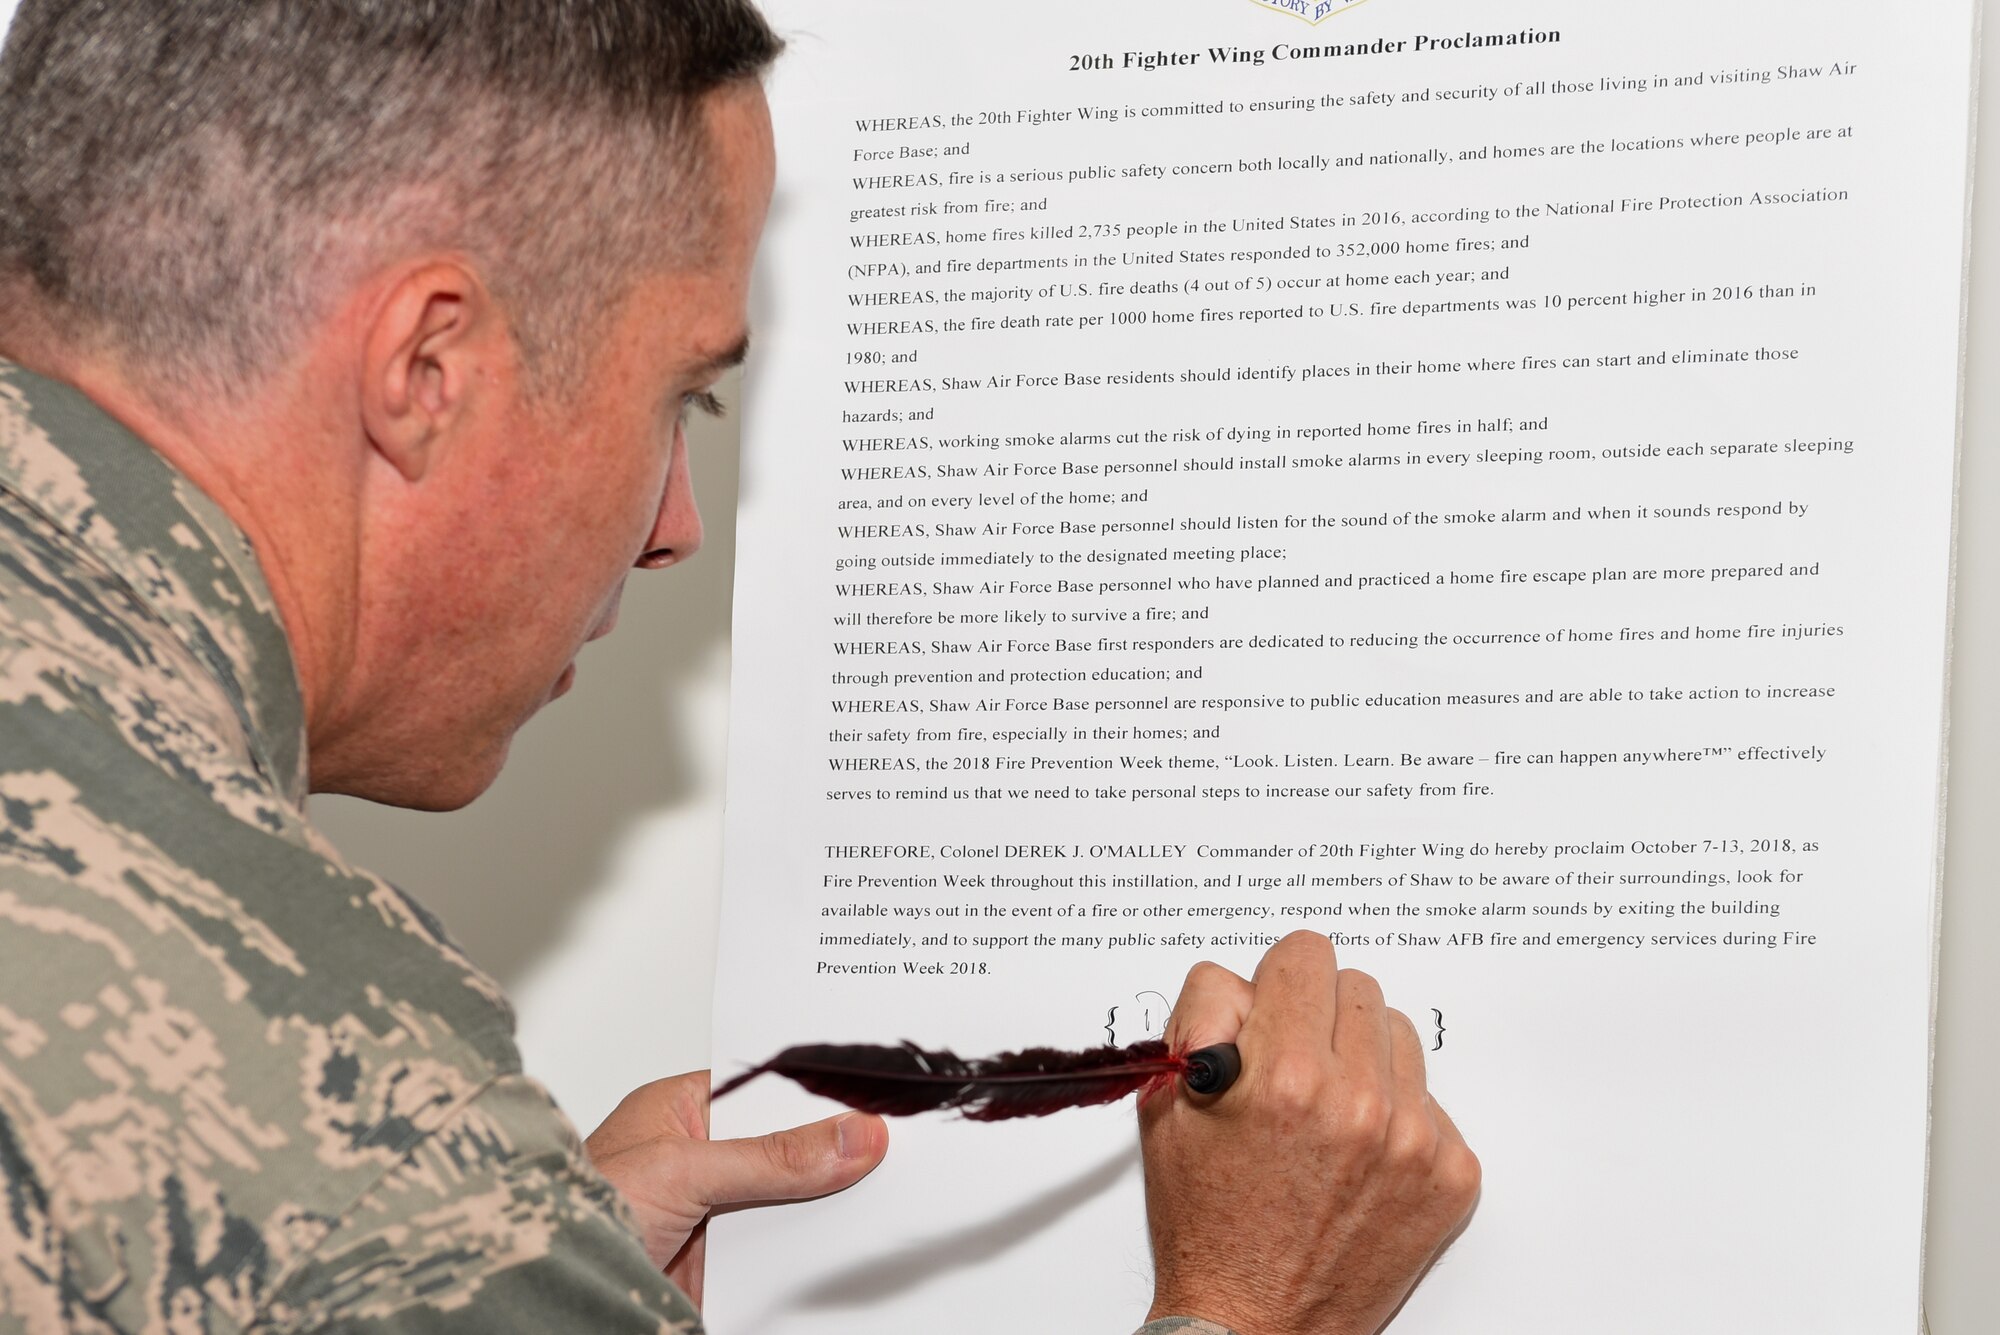 U.S. Air Force Col. Derek O’Malley, 20th Fighter Wing (FW) commander, signs the 20th FW Commander Proclamation, at Shaw Air Force Base, S.C., Sept. 17, 2018.